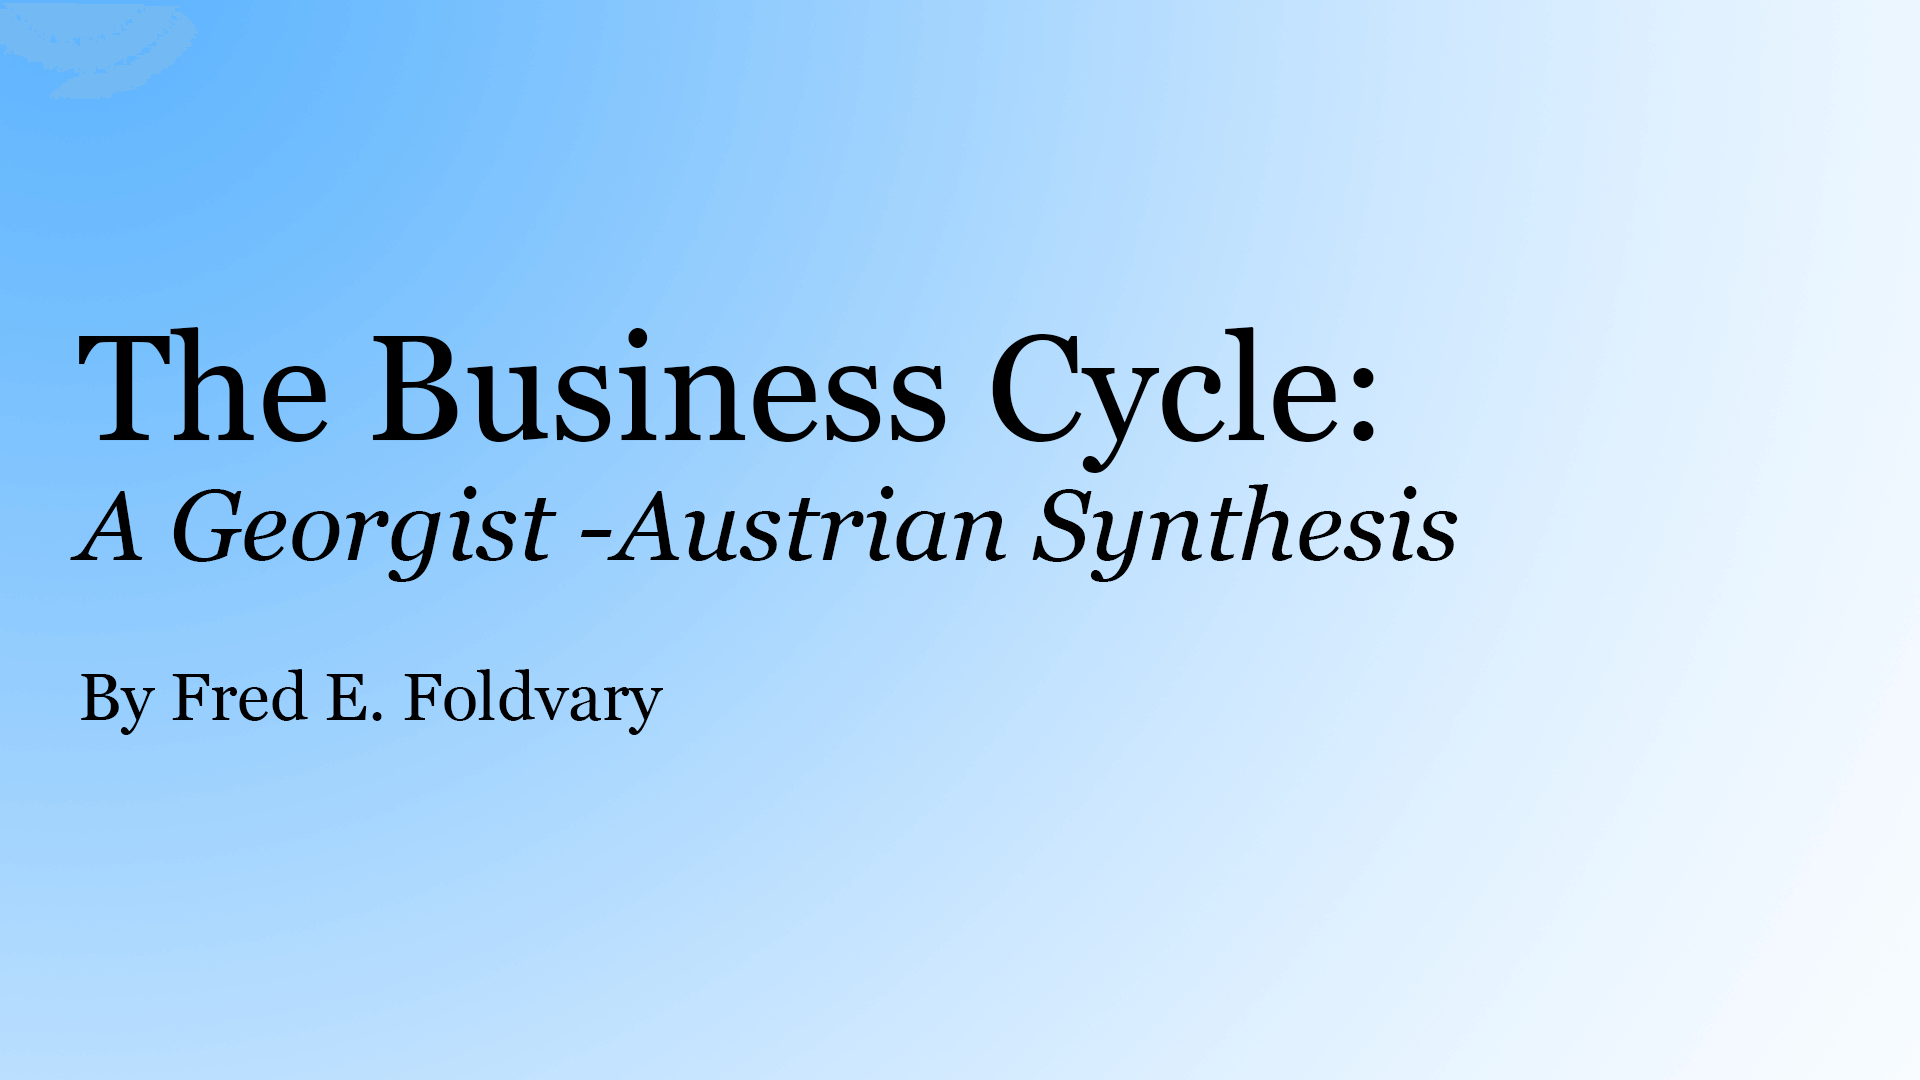 The Business Cycle A Georgist-Austrian Synthesis